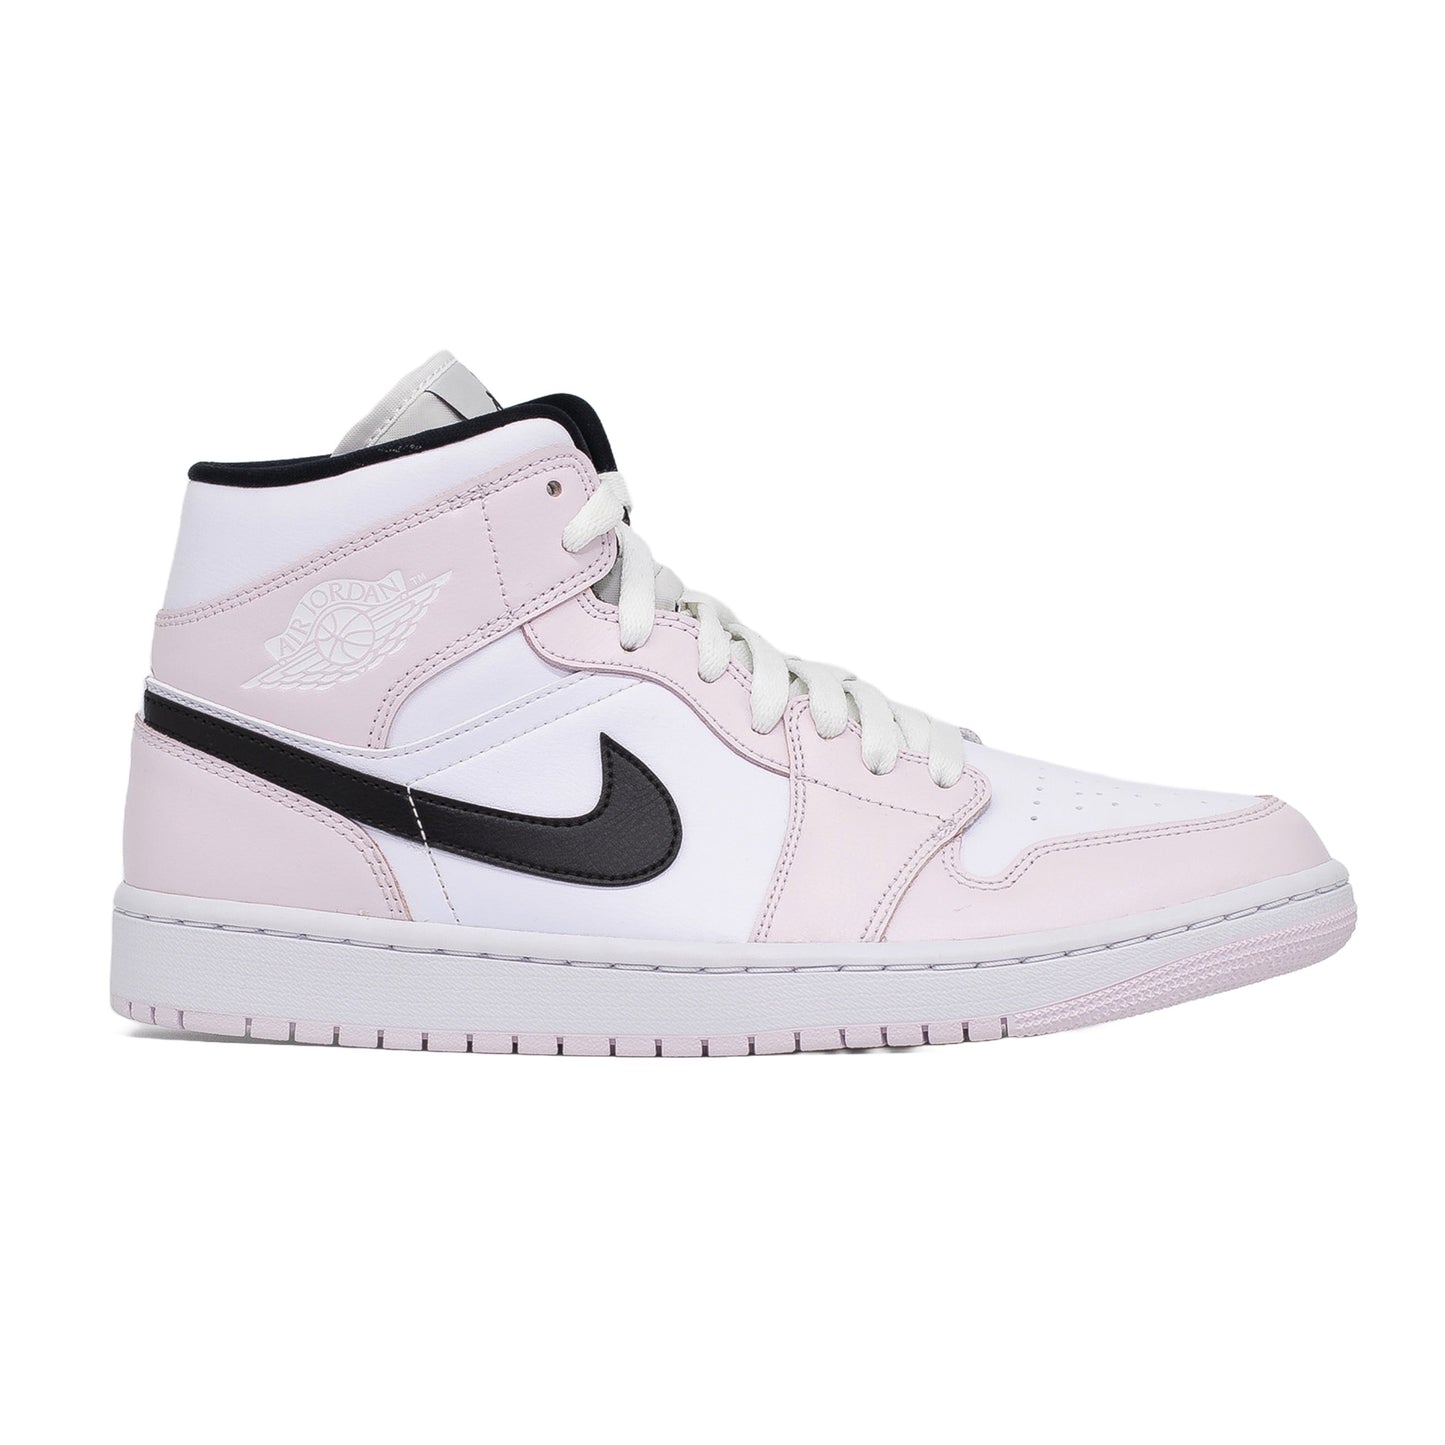 Women's Air air jordan 1 retro high nrg chi homage to home ar9880 023 for sale, Barely Rose